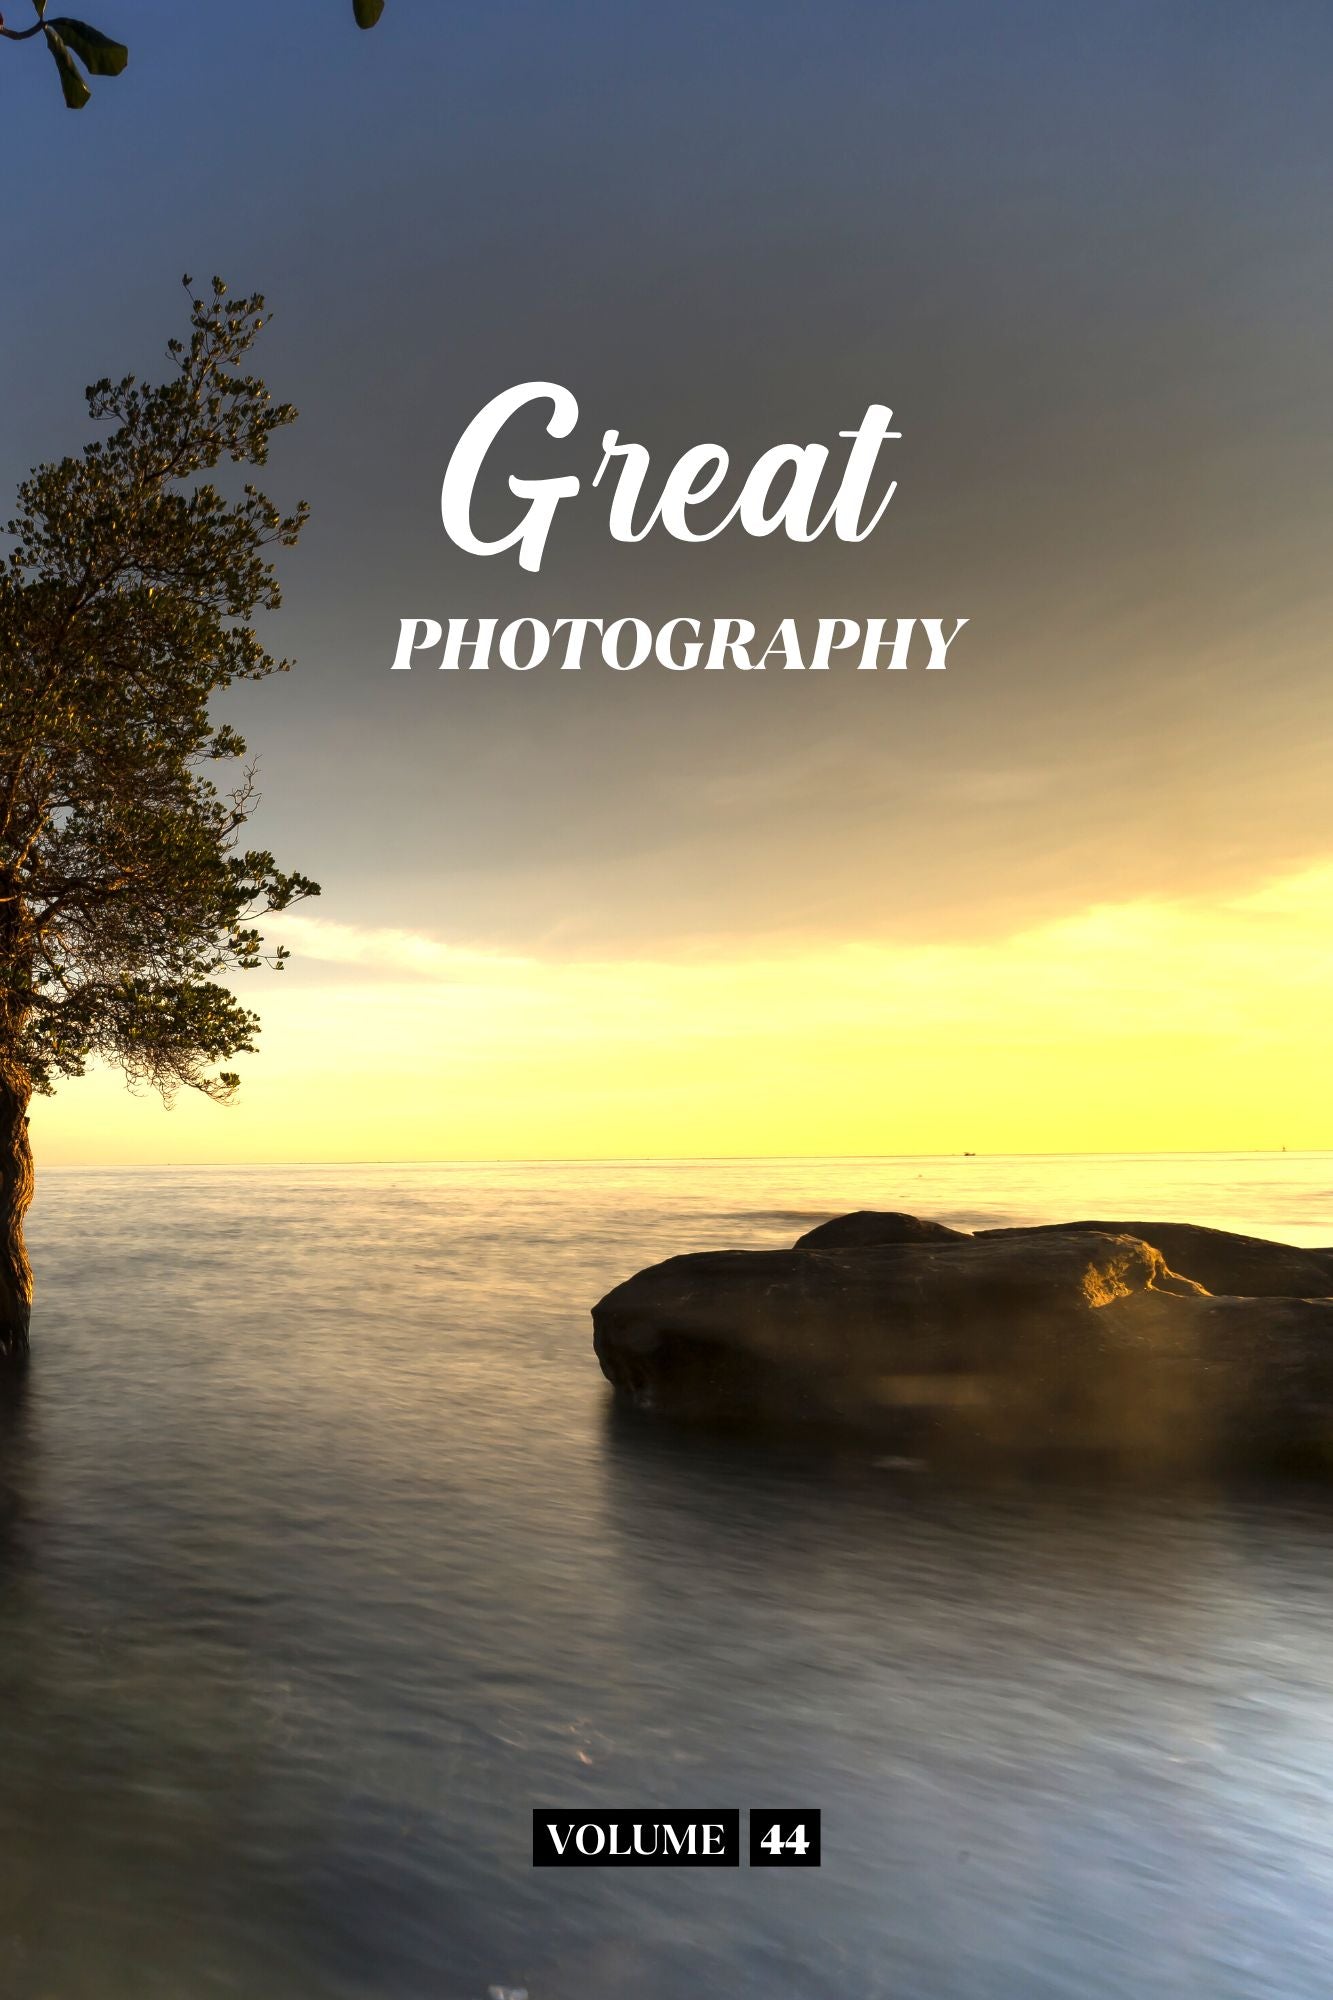 Great Photography Volume 44 (Physical Book Pre-Order)